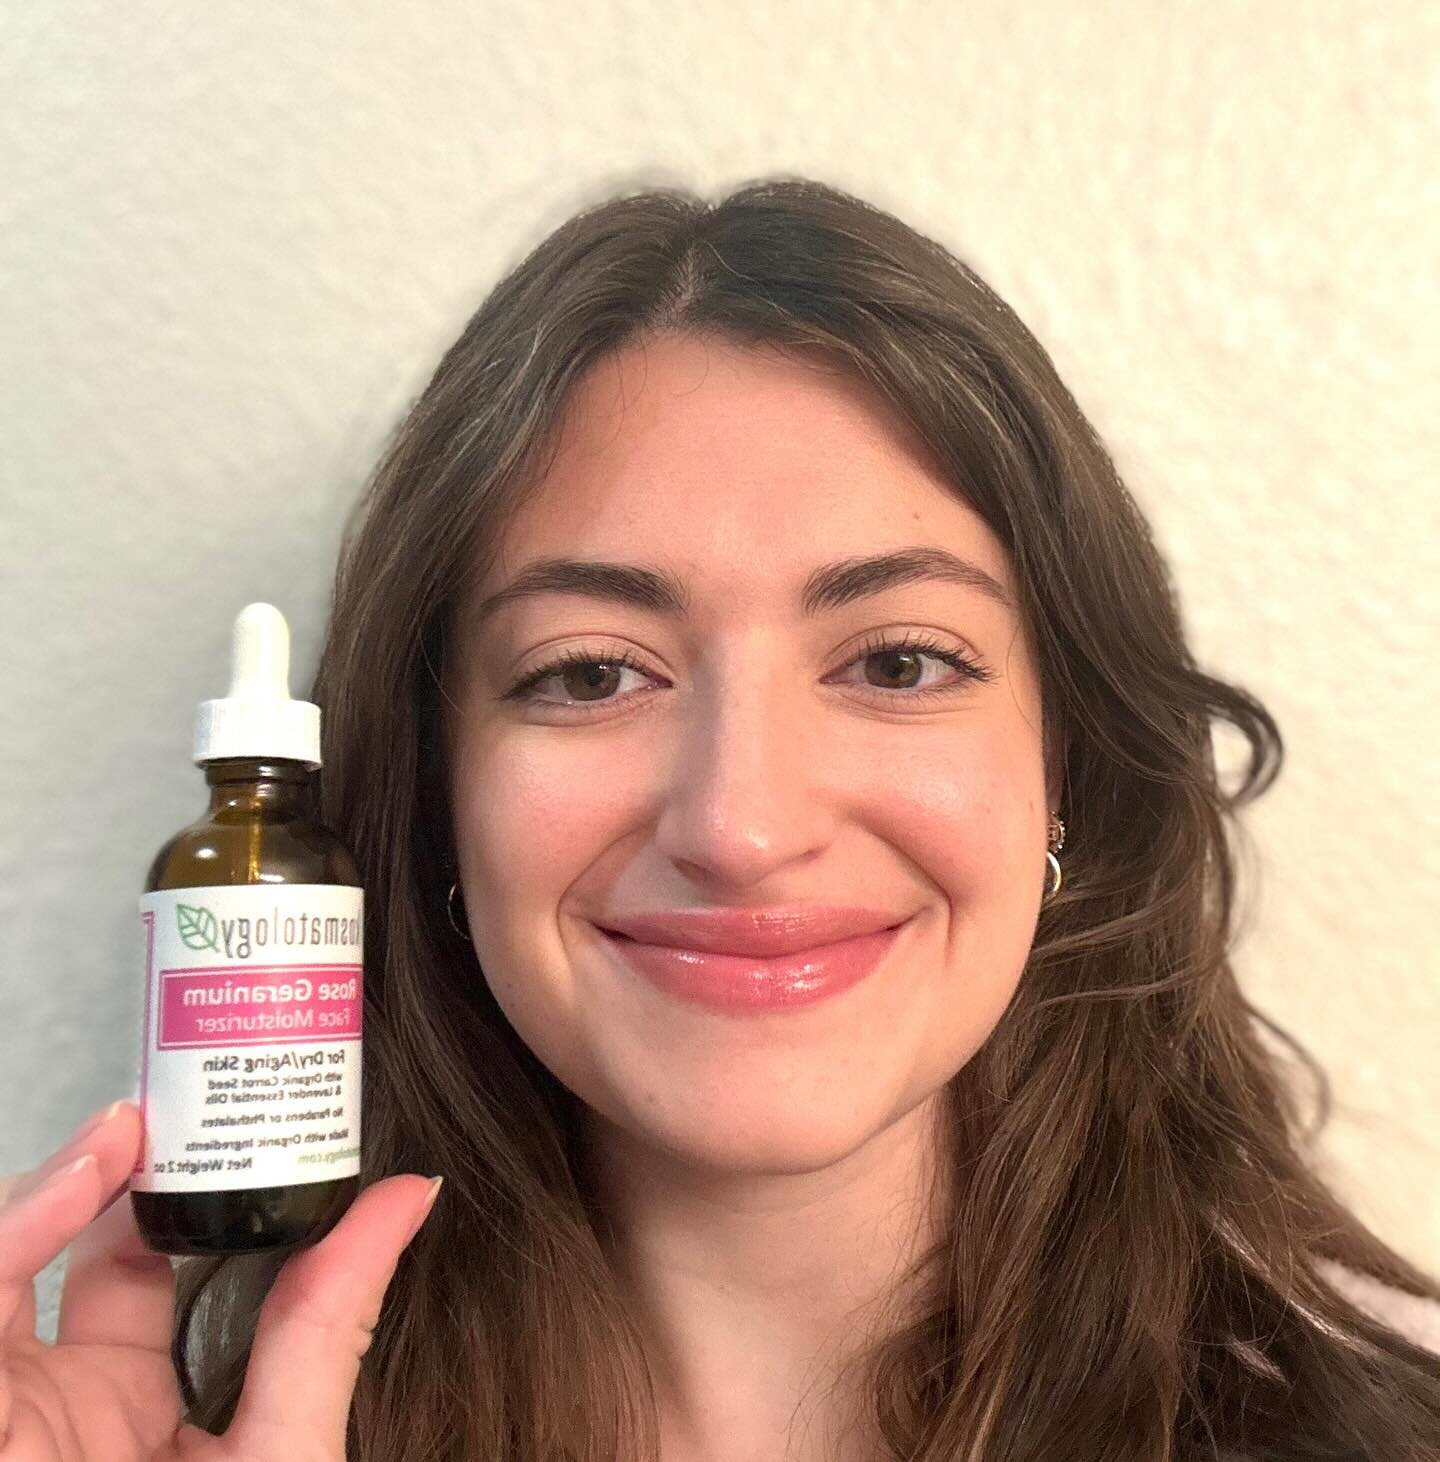 This is Julia. Isn&rsquo;t she gorgeous?  She has been using Kosmatology&rsquo;s Rose Geranium face oil and says her skin has never been more hydrated. #allnaturalbeauty #crueltyfree #crueltyfreebeauty #madesafecertified #greenskincare #vegan #vegans